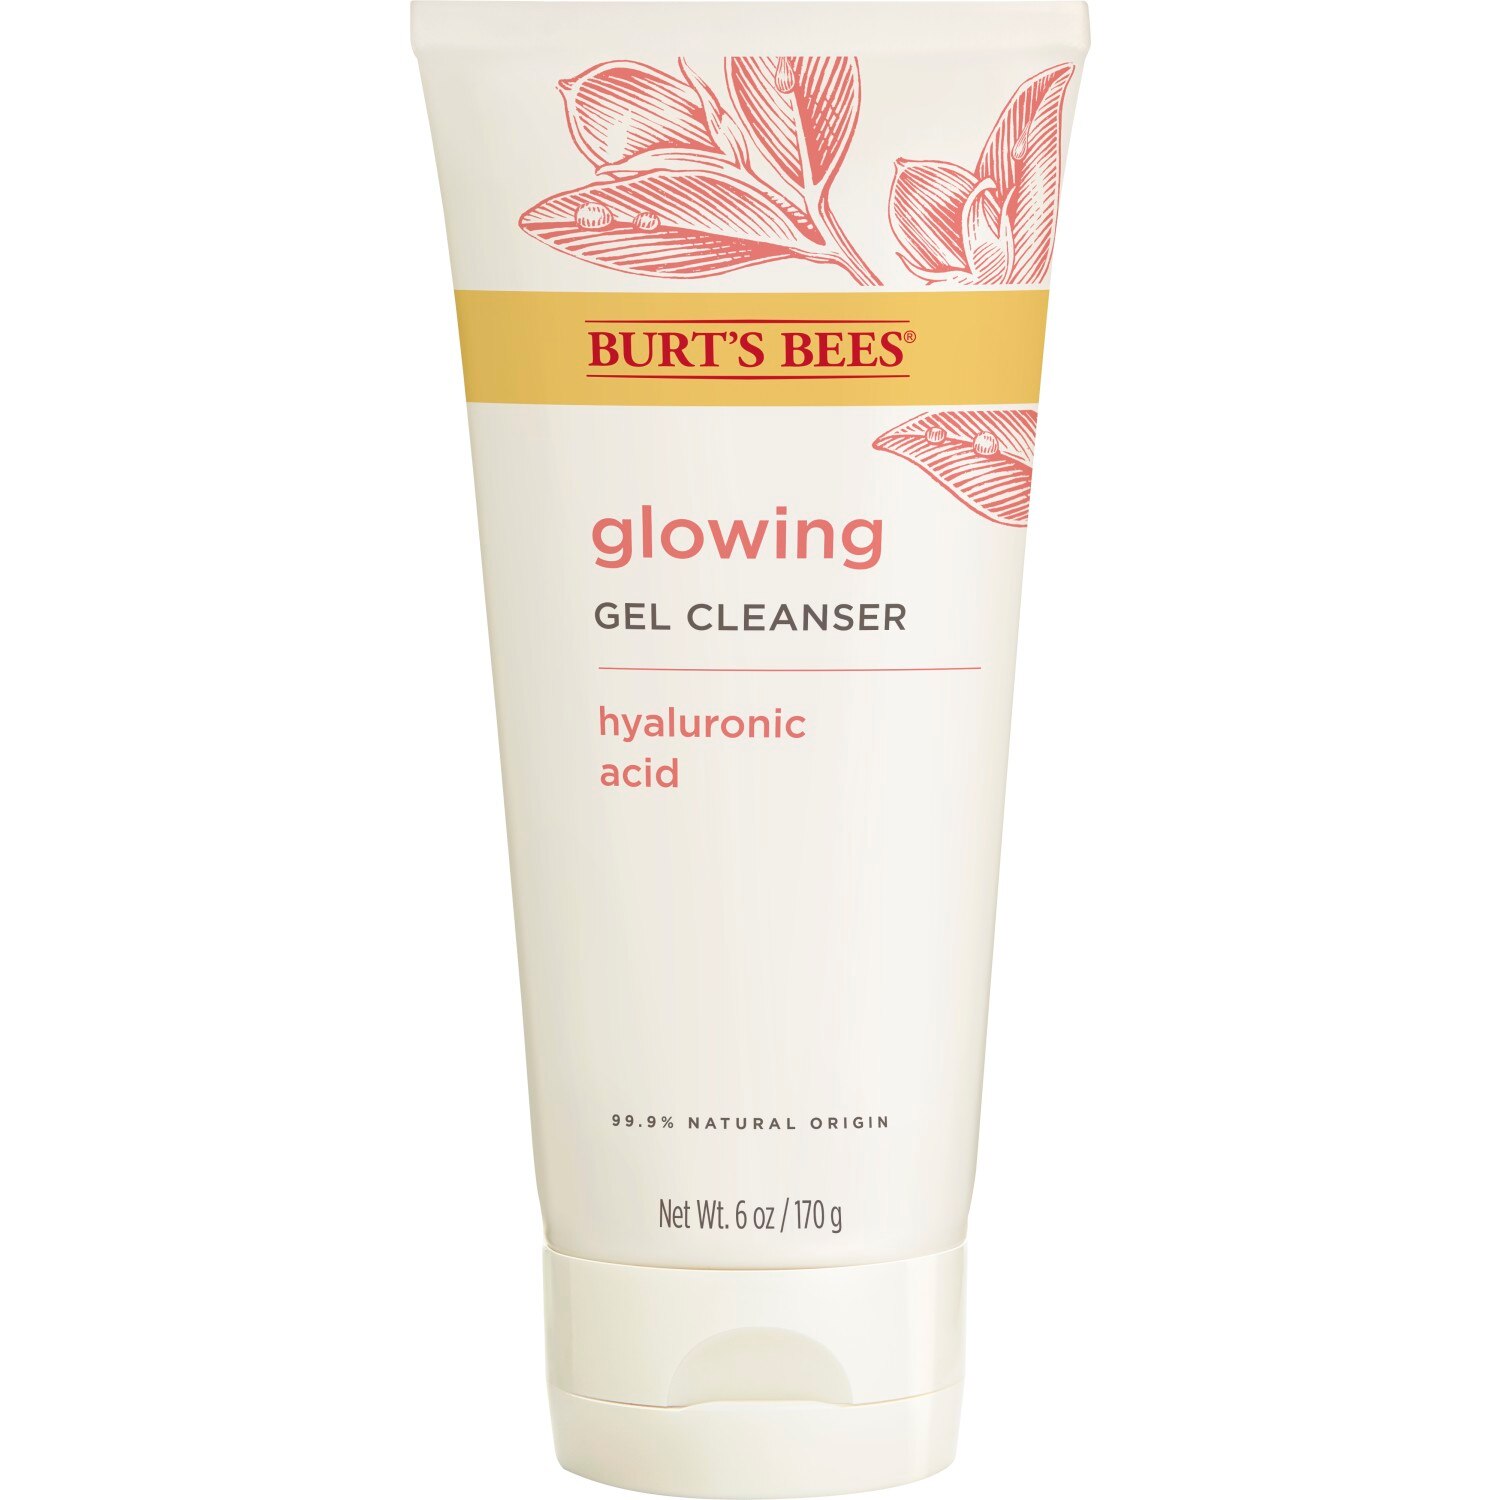 Burt's Bees Truly Glowing Refreshing Gel Cleanser with Naturally Derived Hyaluronic Acid, 6 OZ